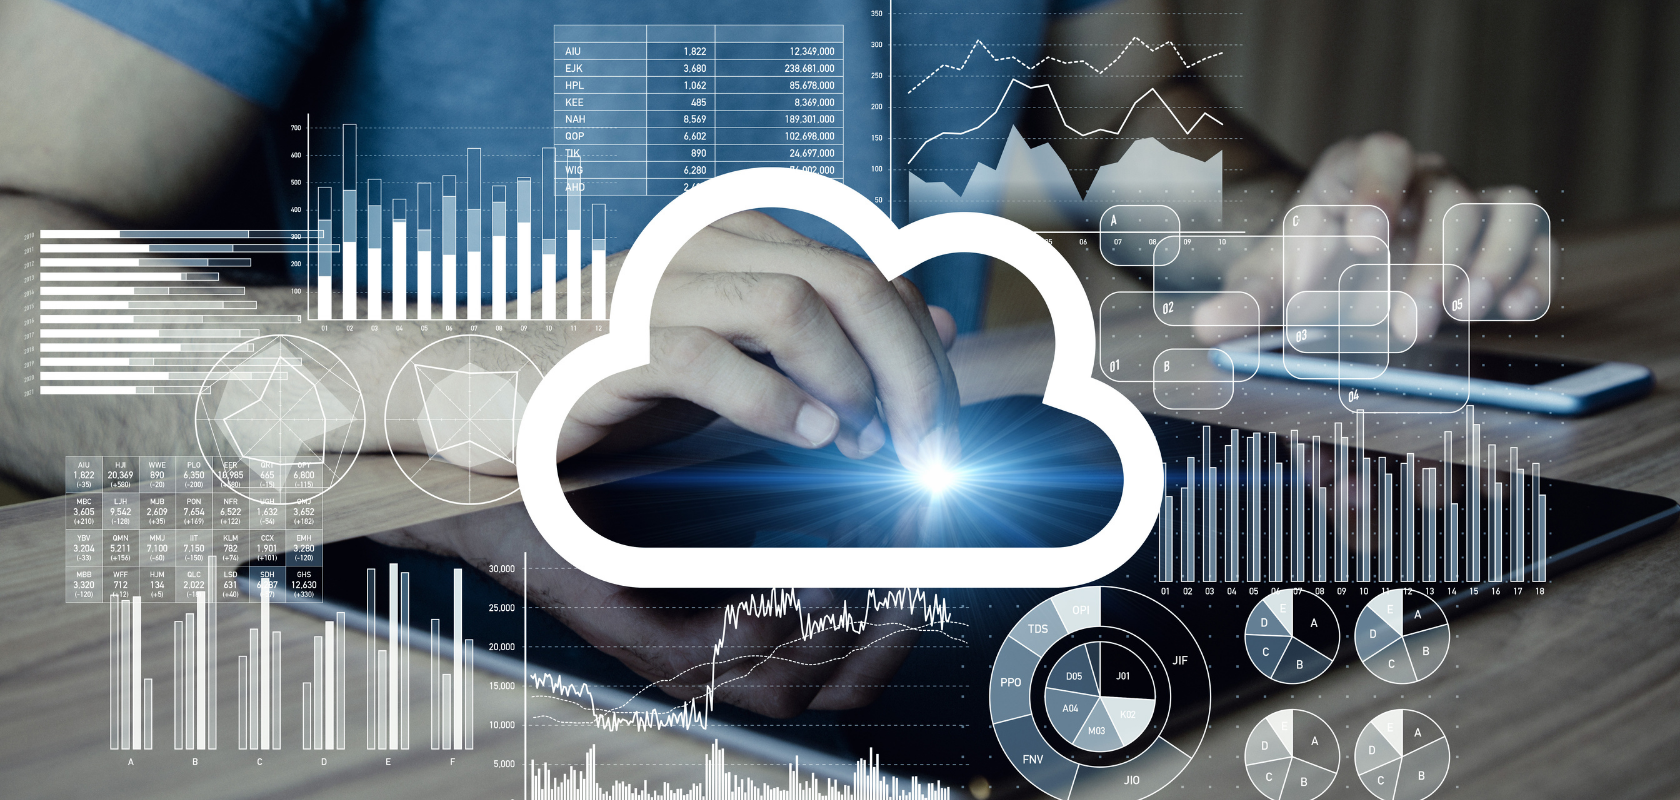 benefits of a Cloud-Based ERP Software and the cloud computing concept